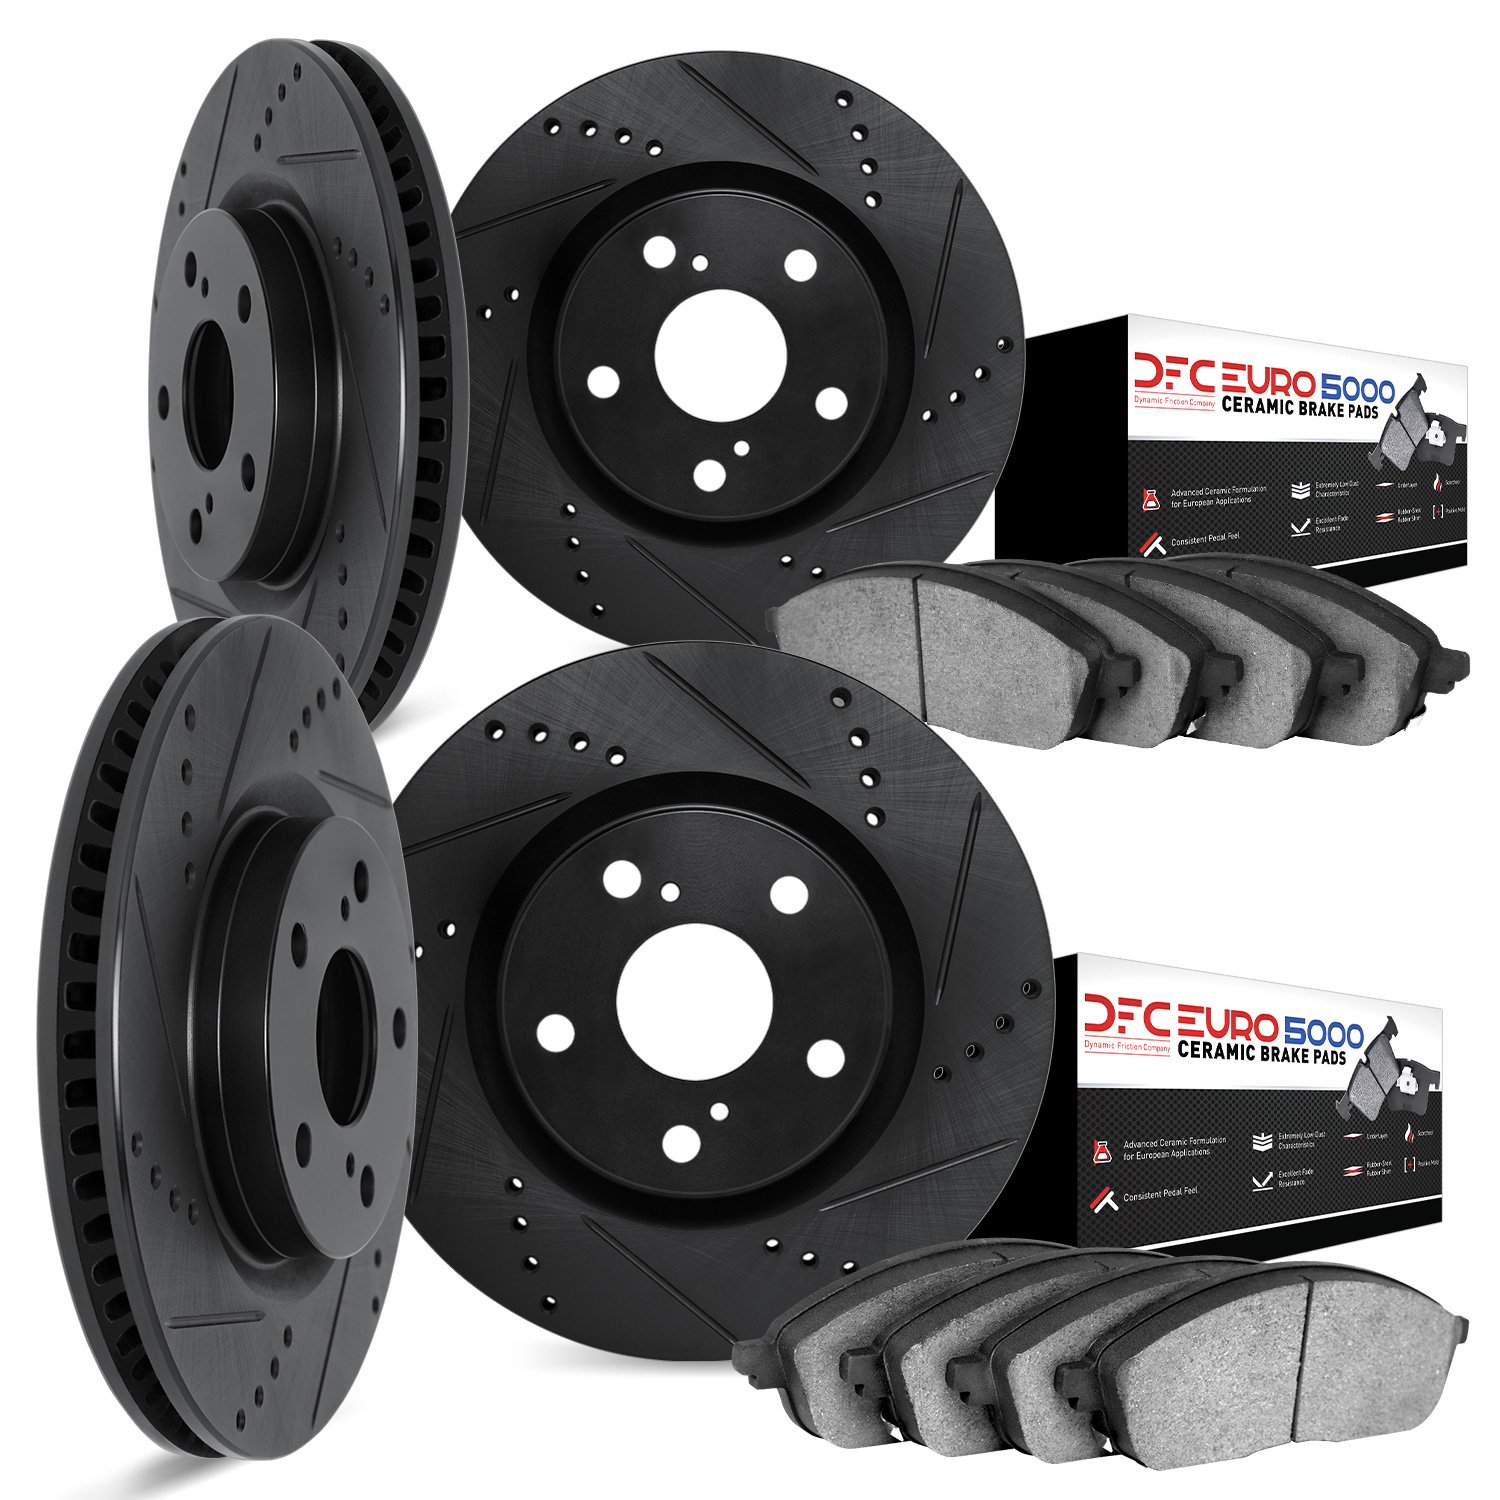 8604-27017 Drilled/Slotted Brake Rotors w/5000 Euro Ceramic Brake Pads Kit [Black], 2007-2015 Volvo, Position: Front and Rear